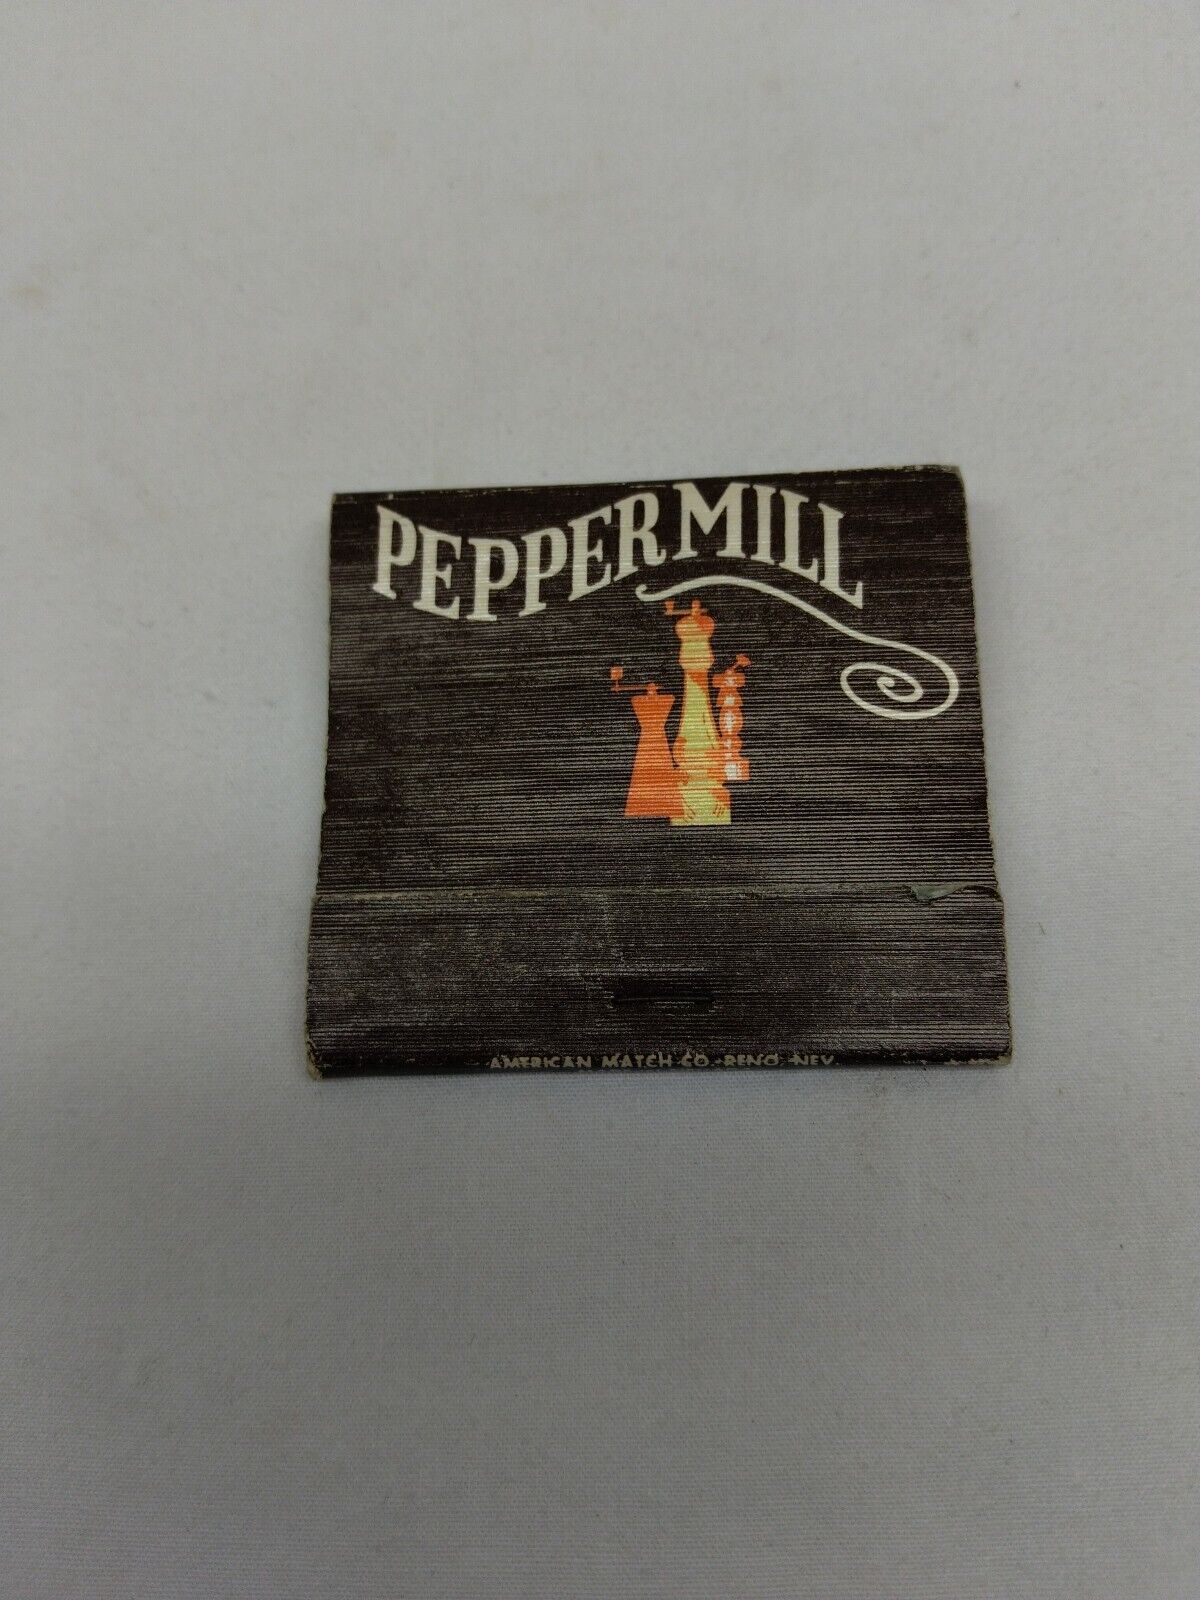 Vintage Peppermill Matches